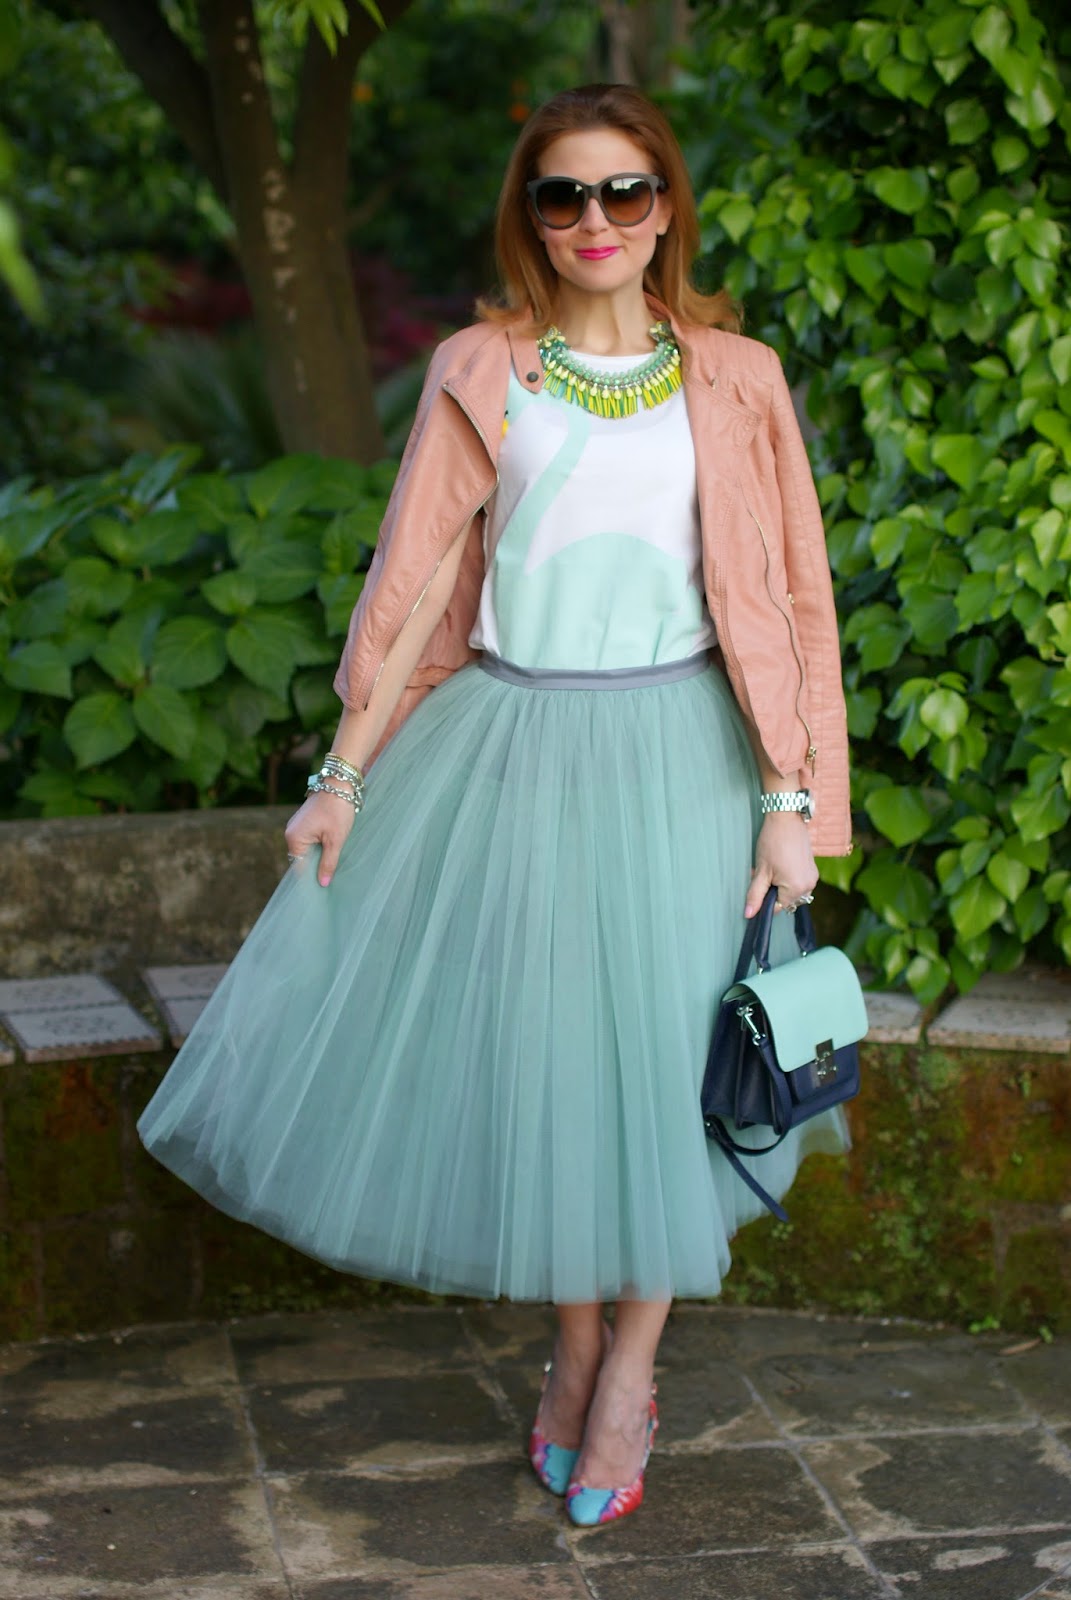 Mint tulle skirt | Fashion and Cookies - fashion and beauty blog